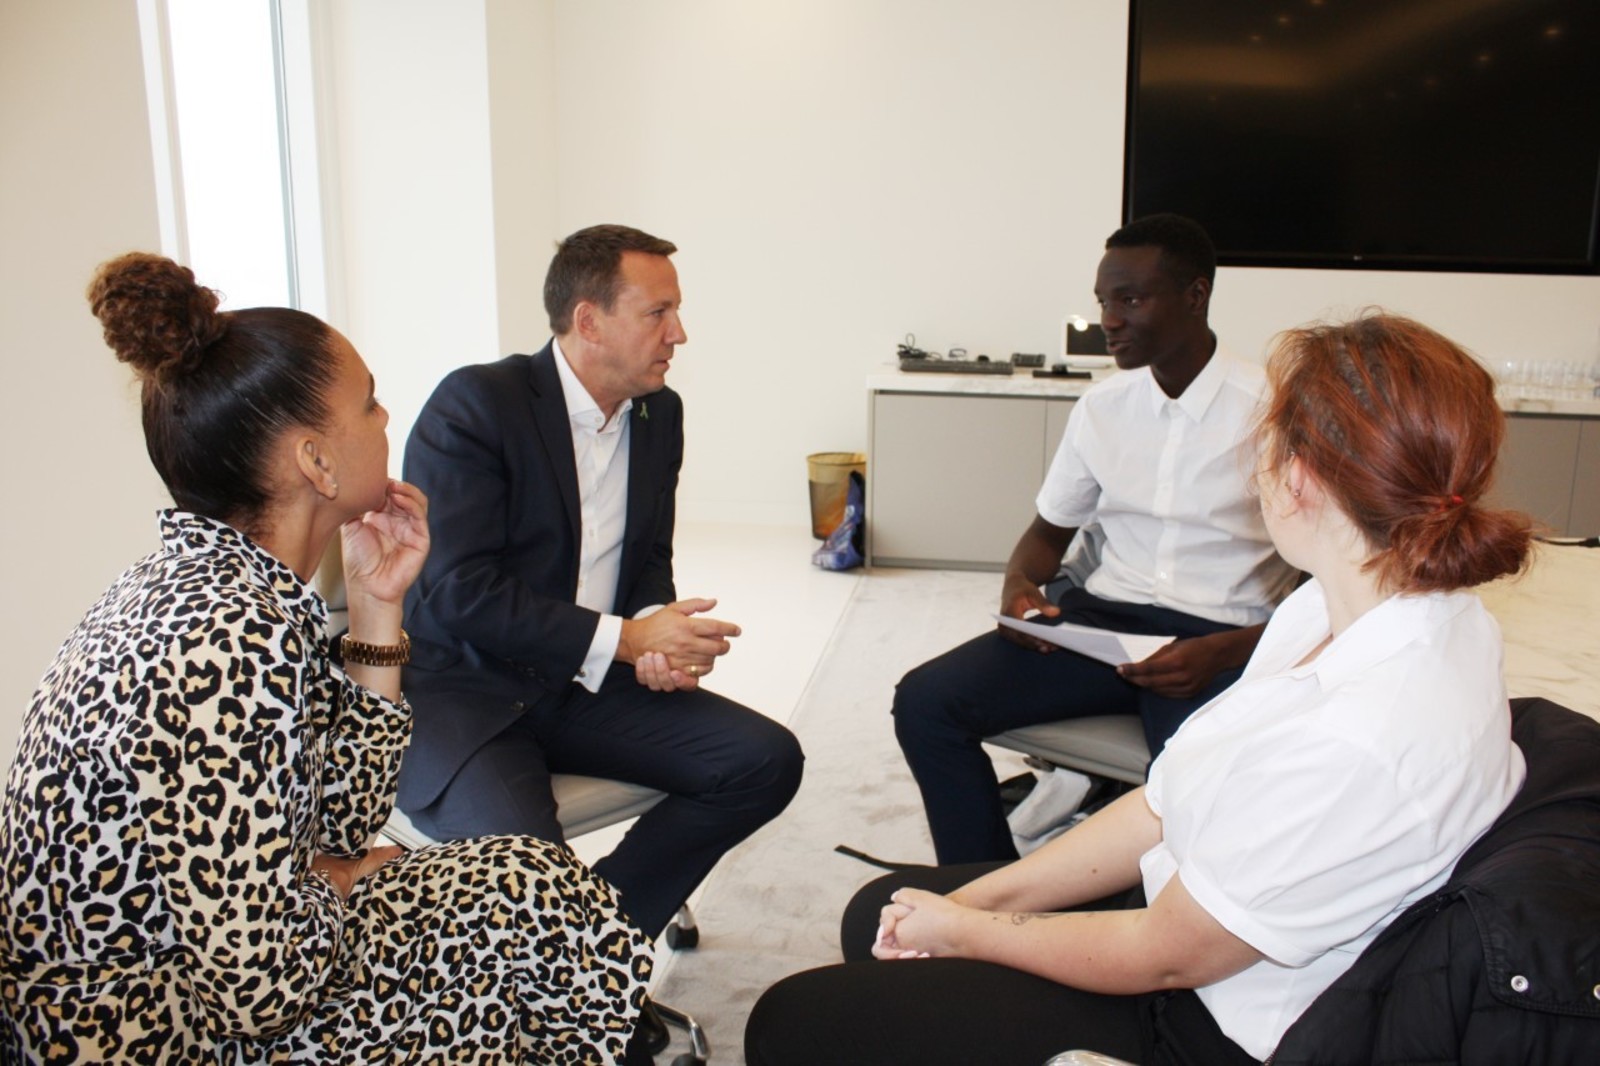 Bringing community and business together at Creed’s Works hope held by the Canary Wharf Group